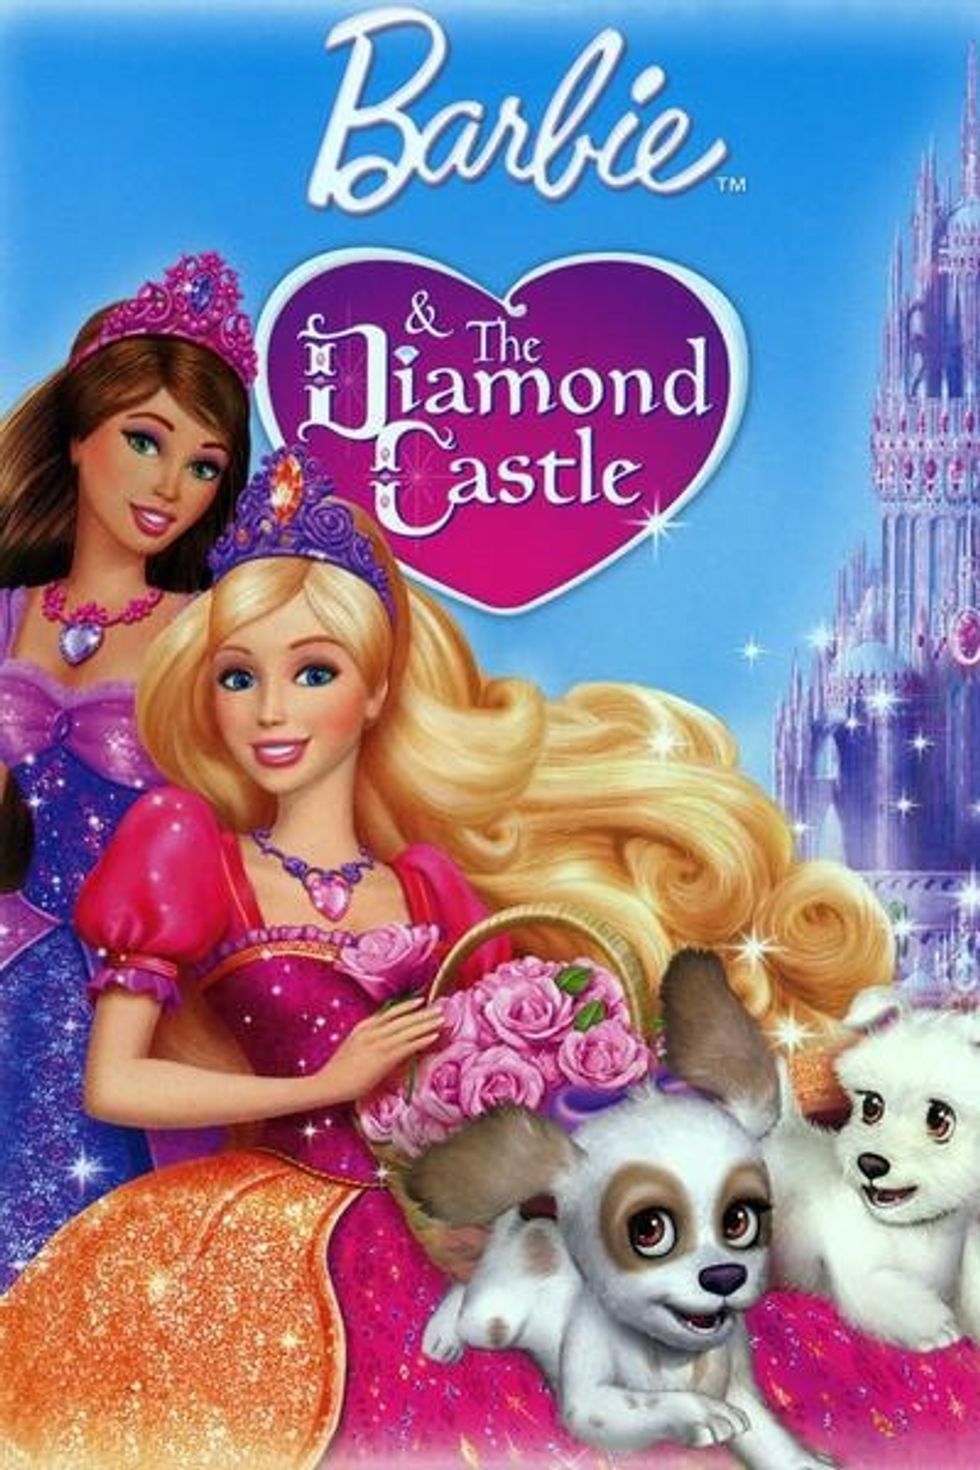 Top Ten Barbie Movies for a Pick-Me-Up